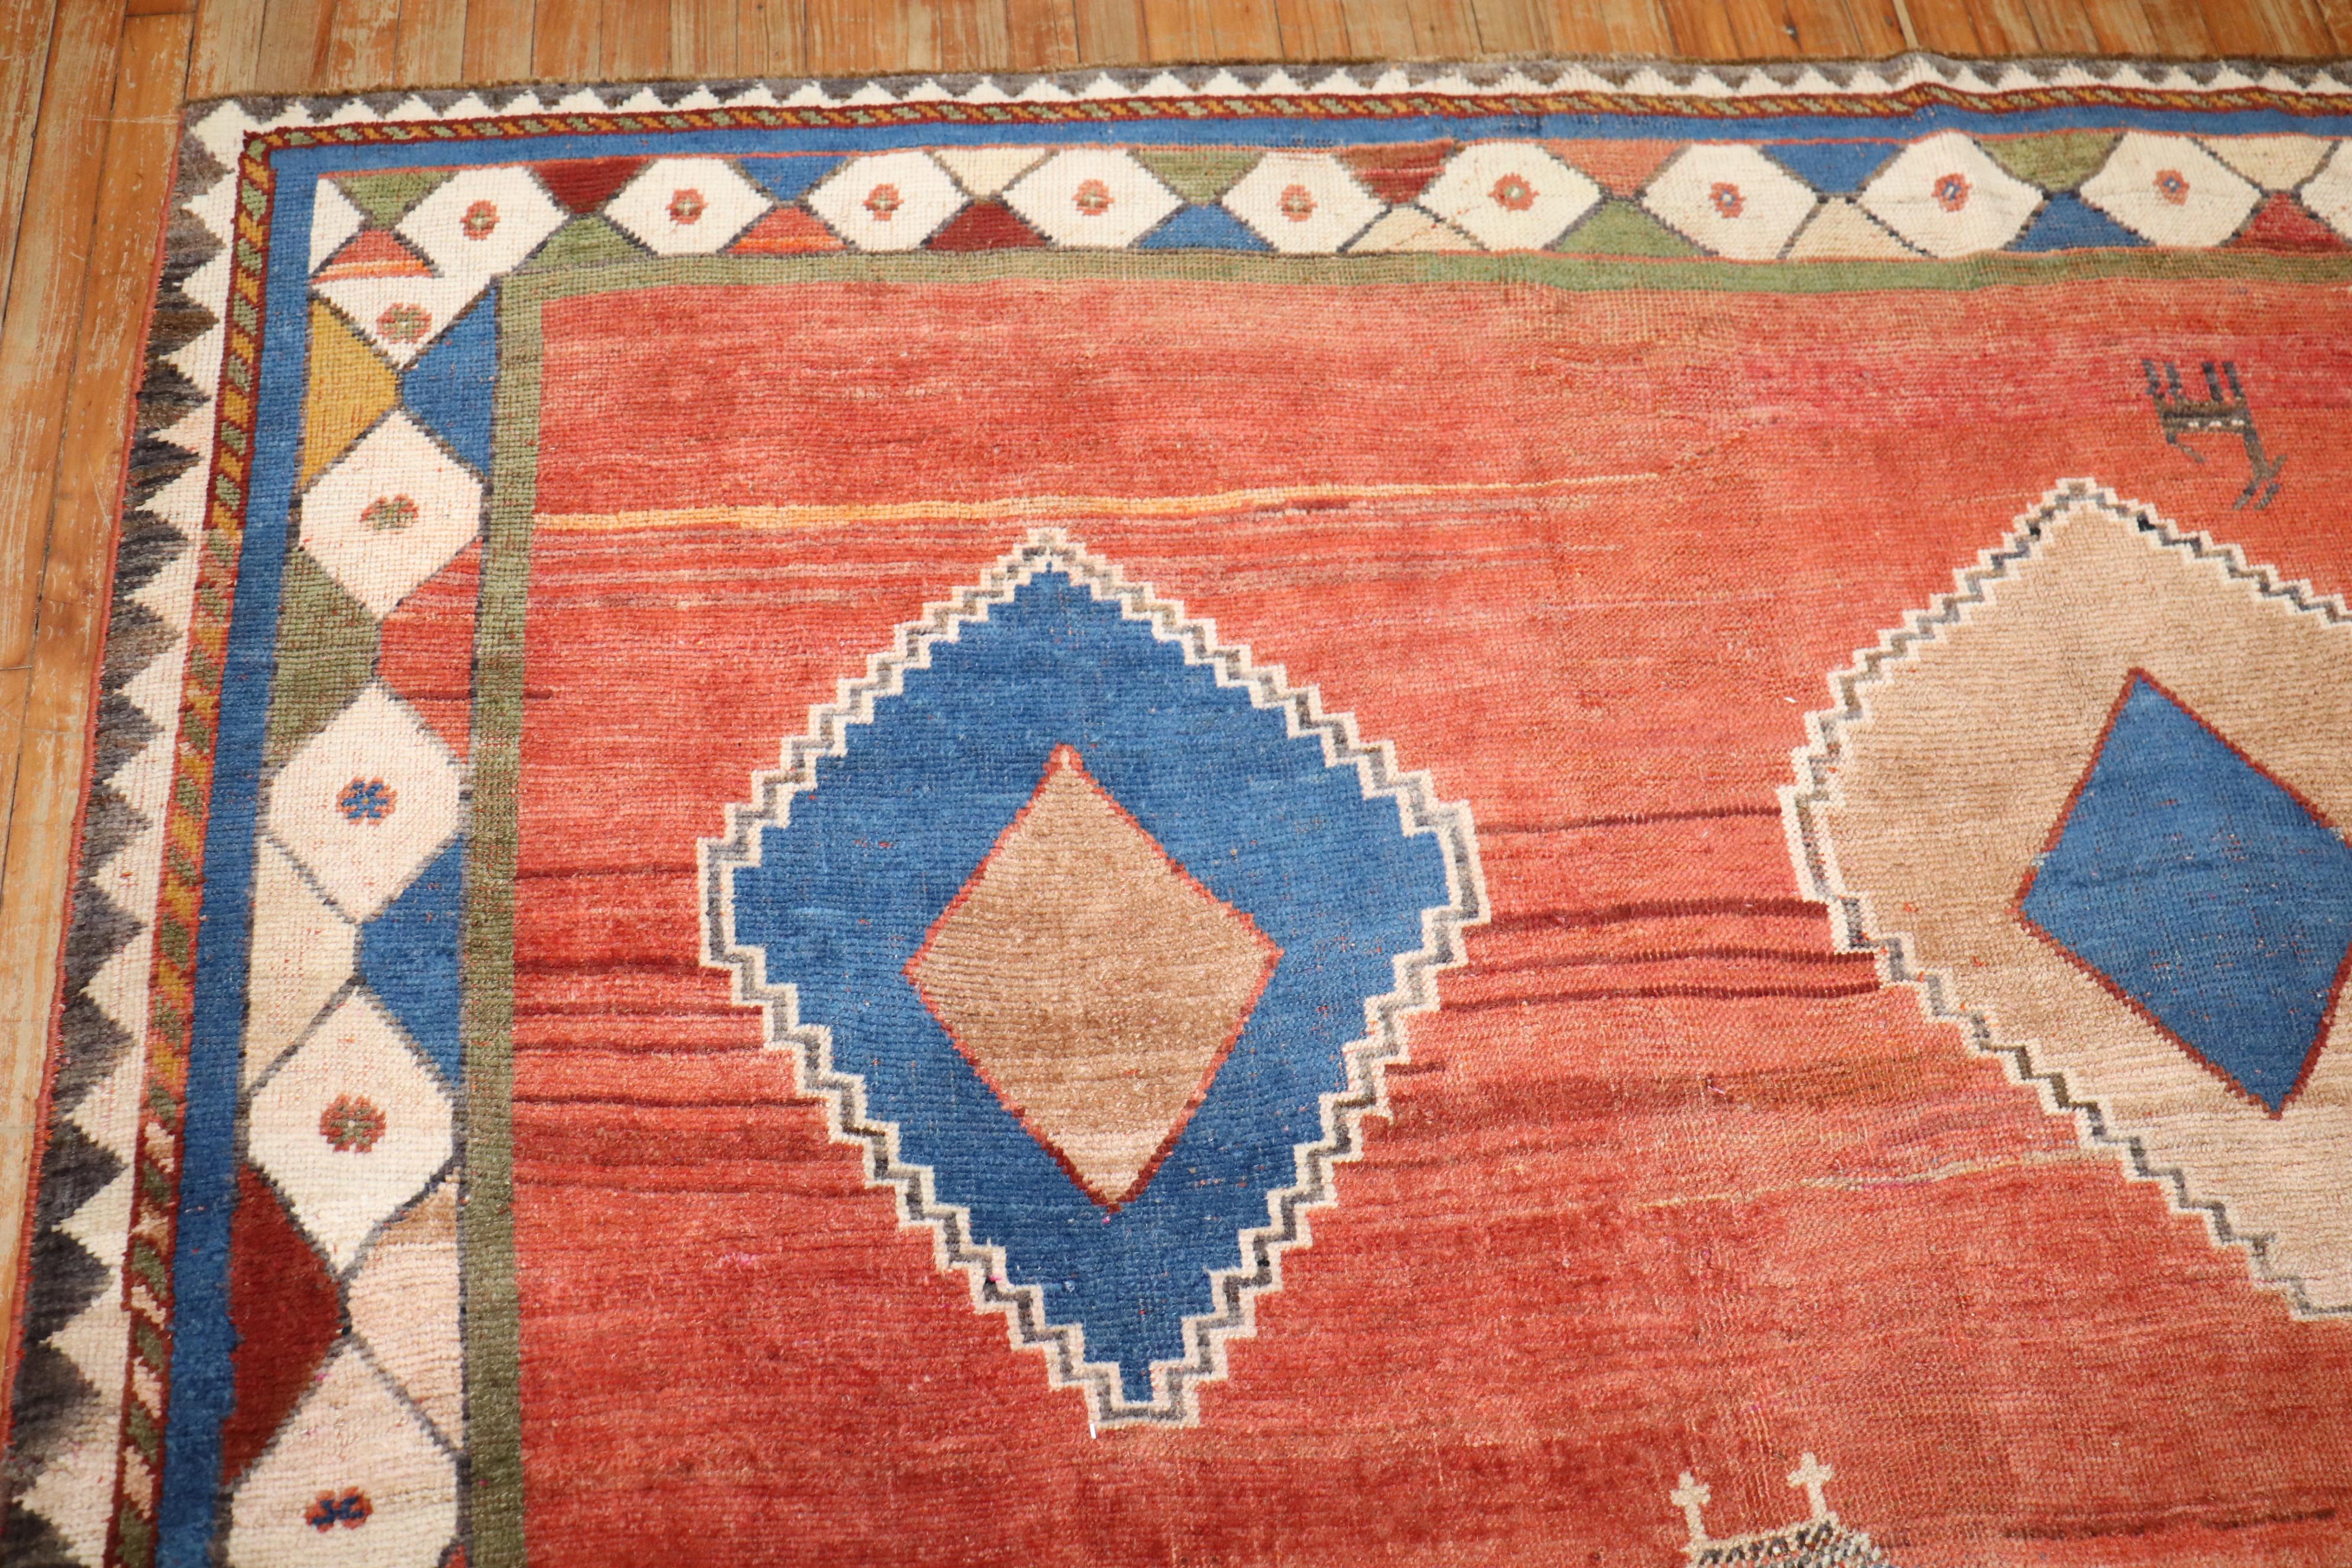 rare square shaped tribal Persian Gabbeh rug from the 2nd quarter of the 20th century. The signature reads 